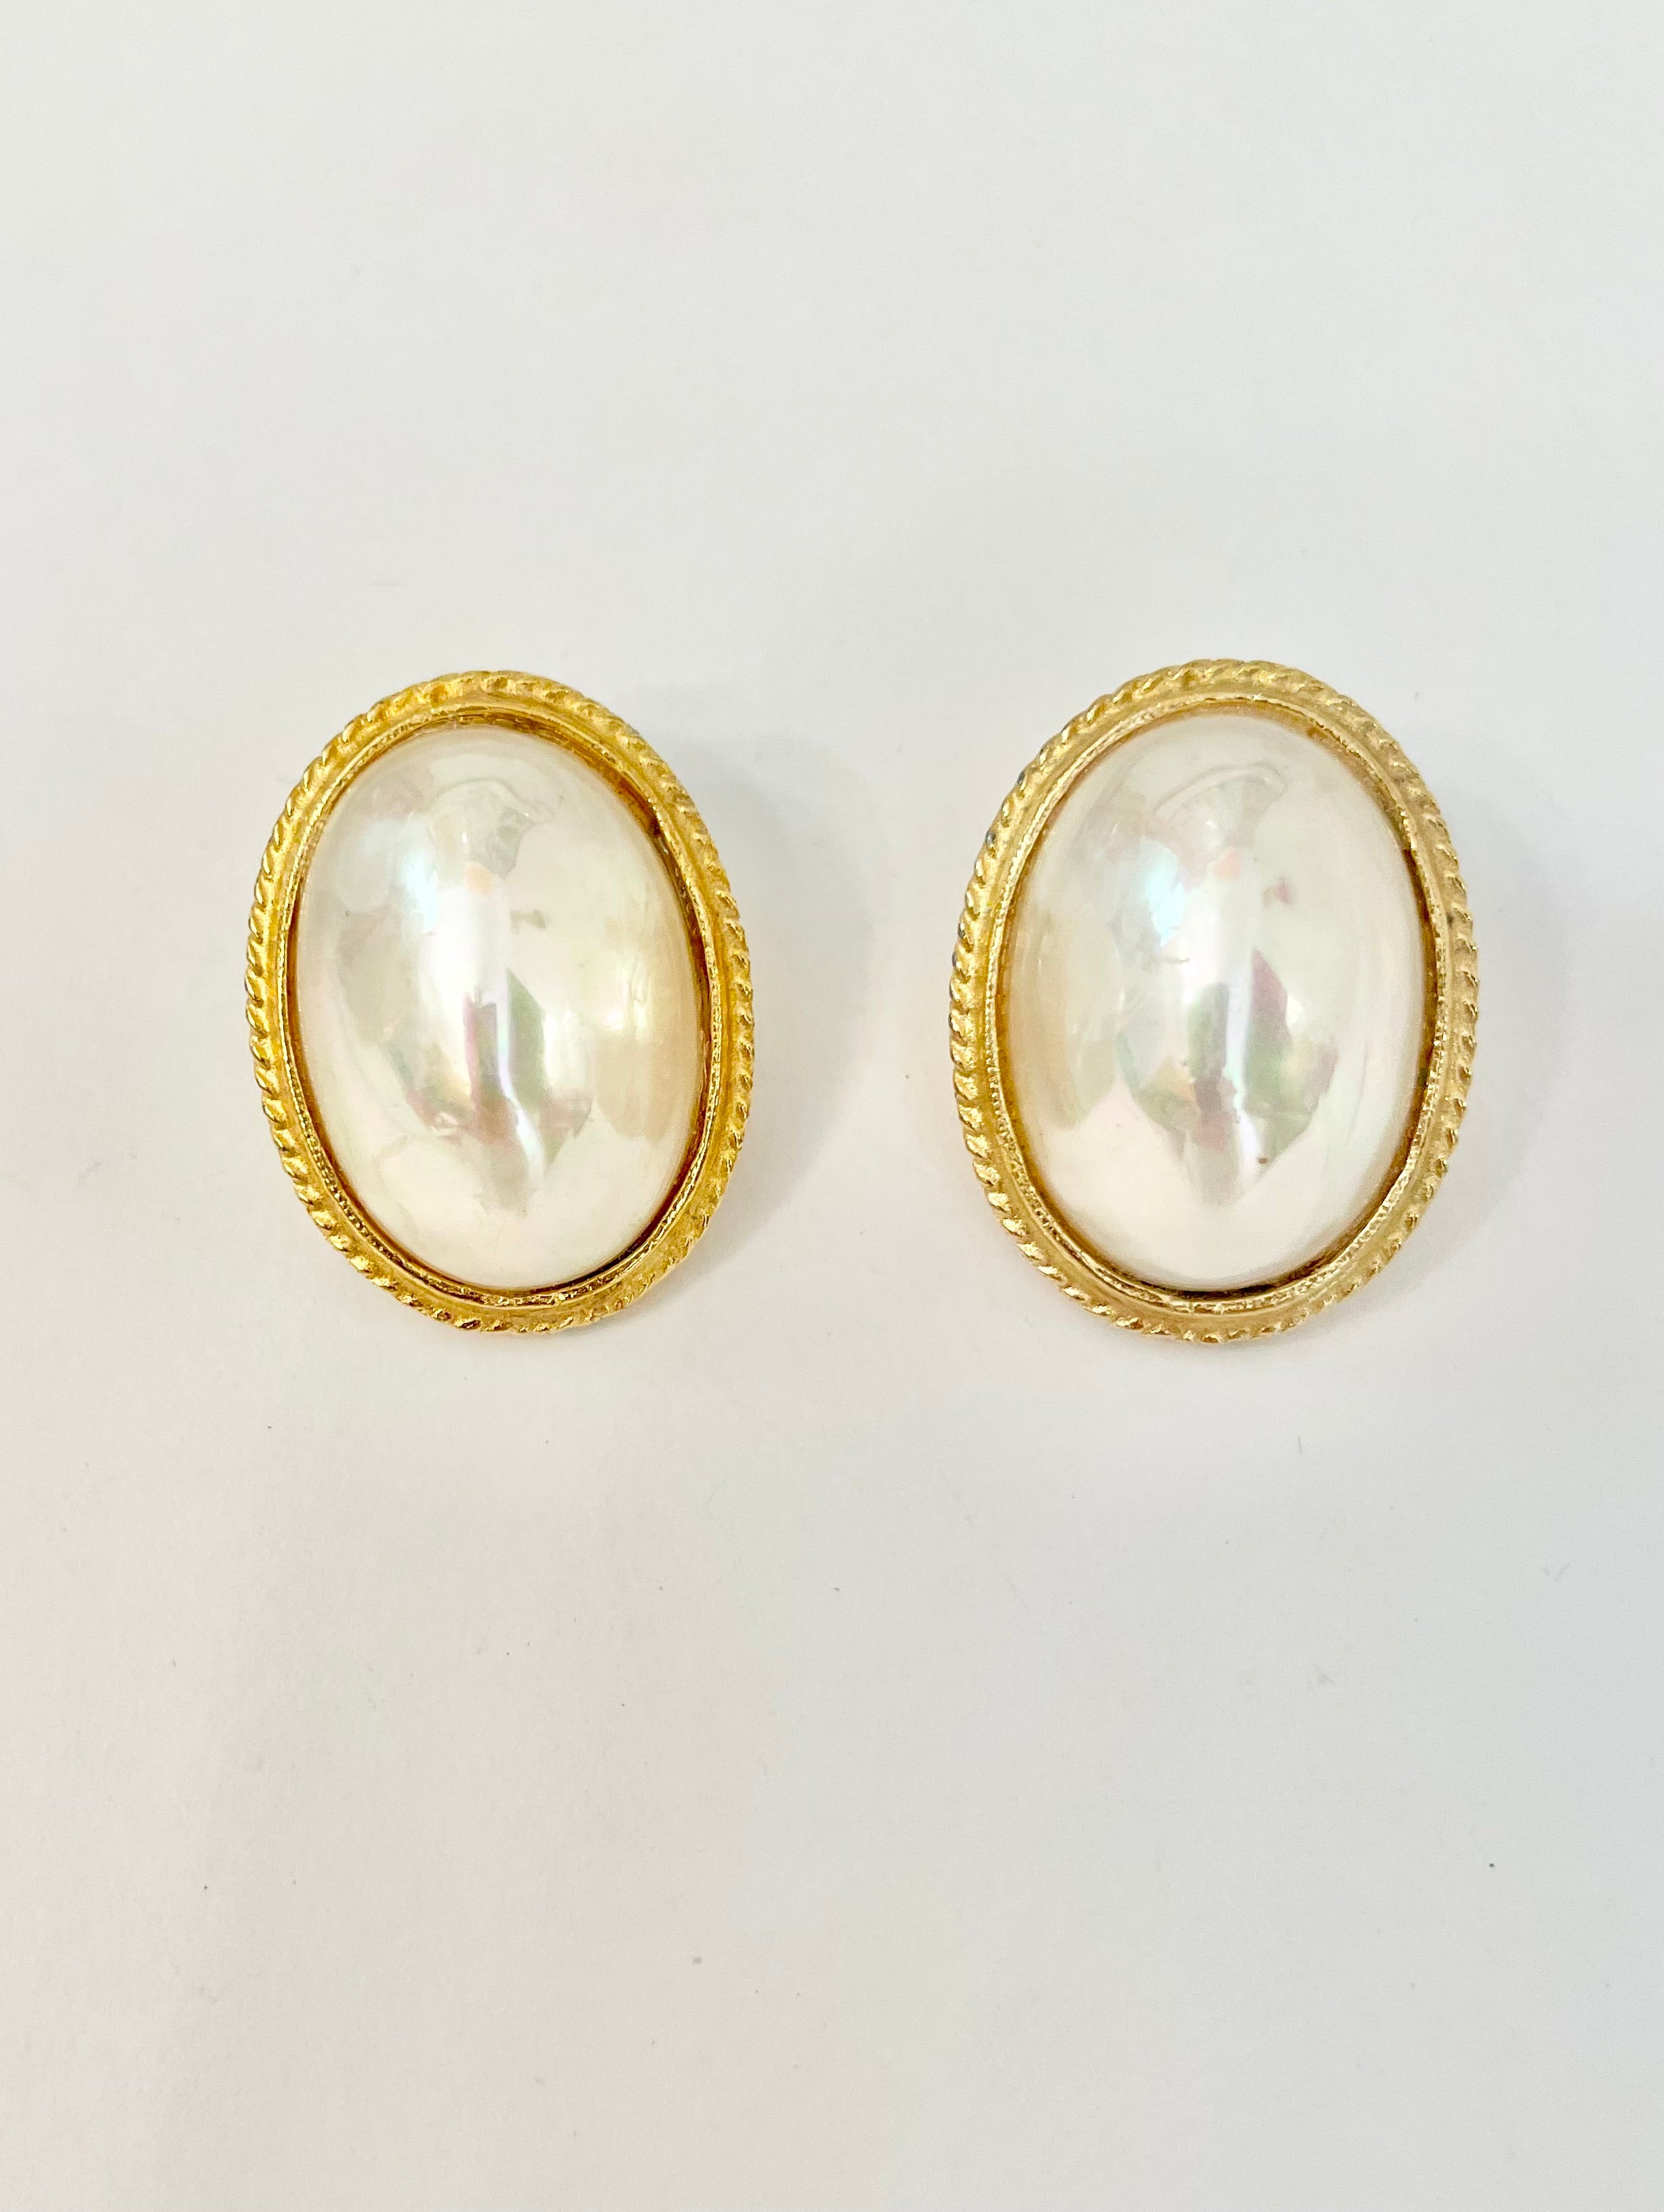 Divine Kenneth Jay Lane classy faux baroque pearl button earrings... a must for any lady!